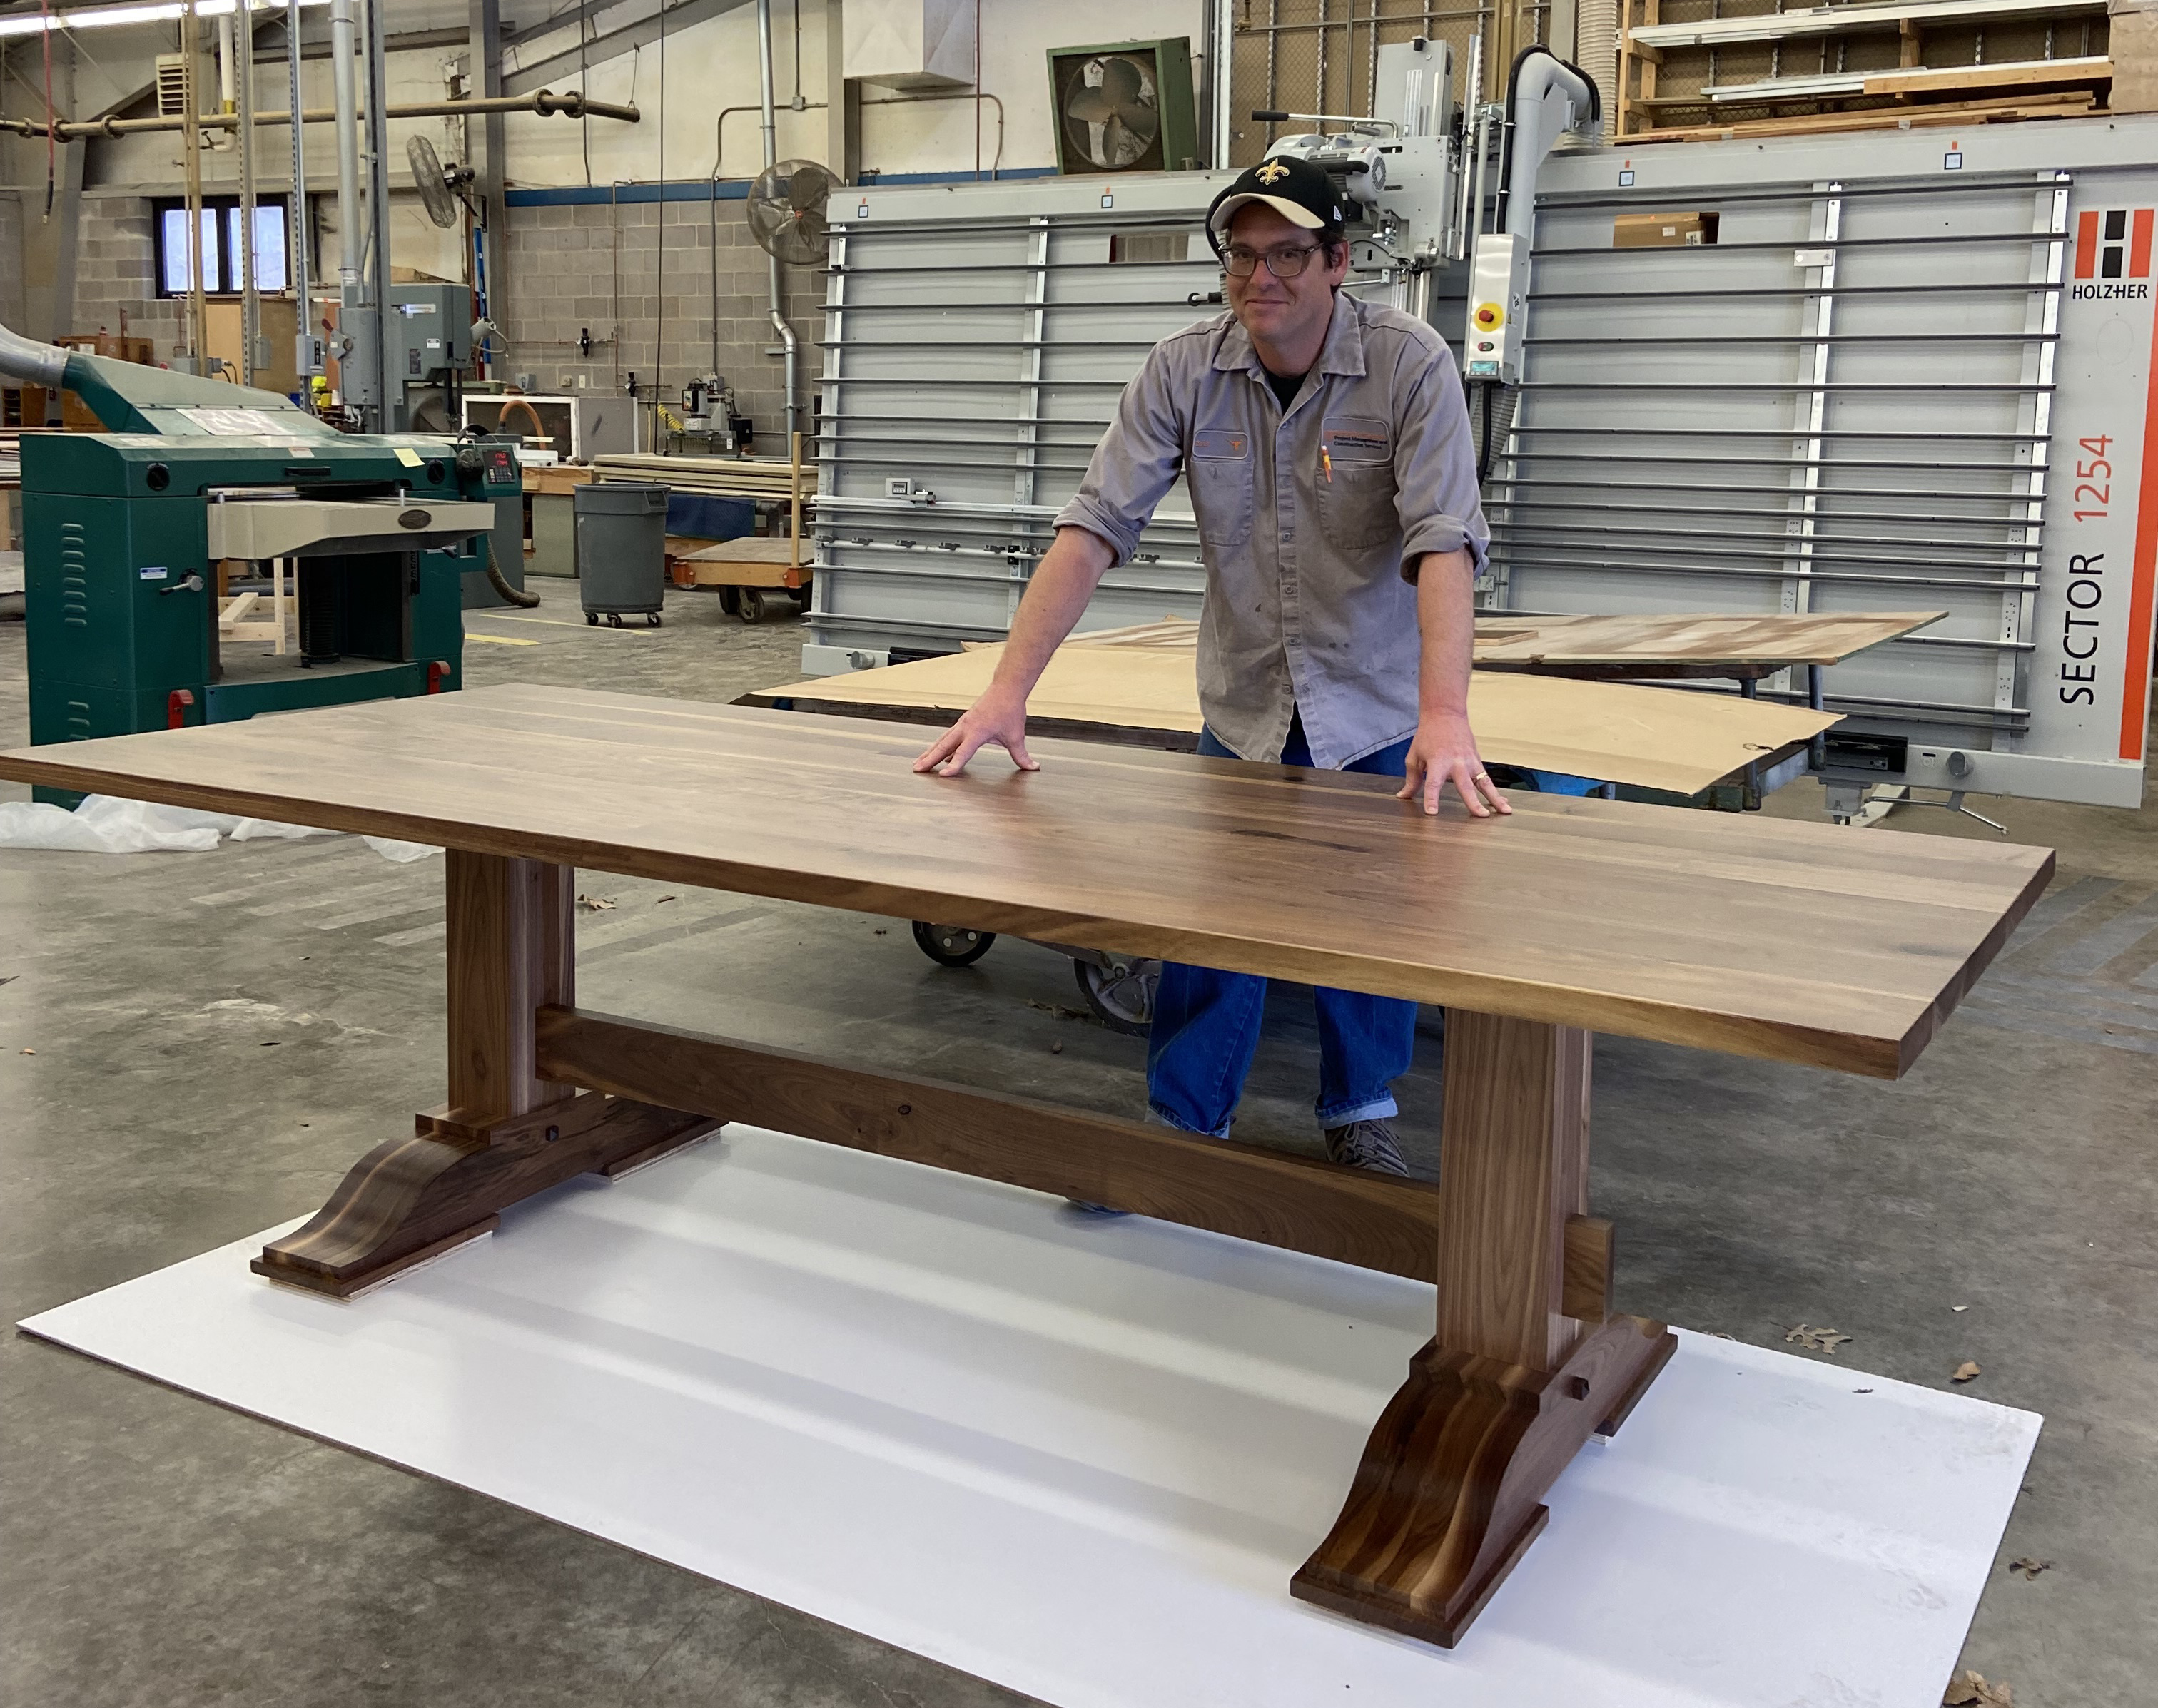 Zach LeBlanc with completed table.